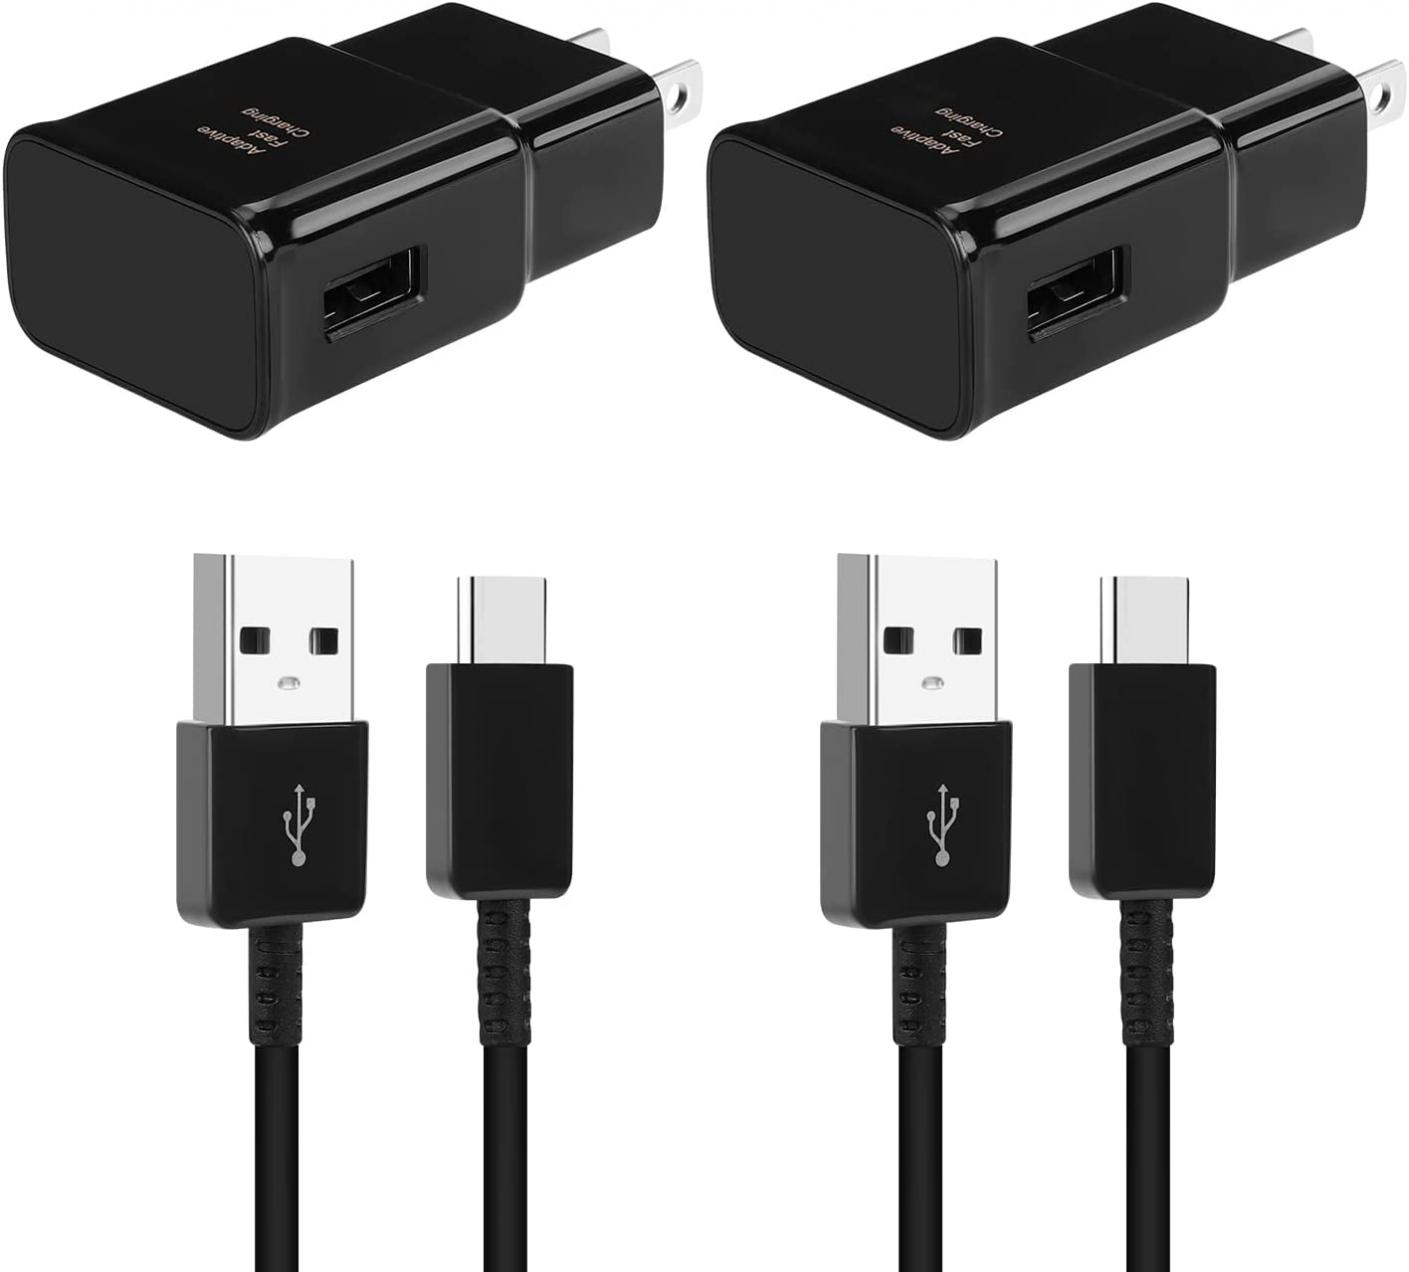 Android Phone Charger, Adaptive Fast Type C Charger with 6.6FT USB C Fast Charging Cable for Samsung Galaxy S10/S9/S8/S10e/S10+/S8+/S9+/S22/S22+/S22Ultra/S21/S21+/S21Ultra/S20/S20+(2 Pack)